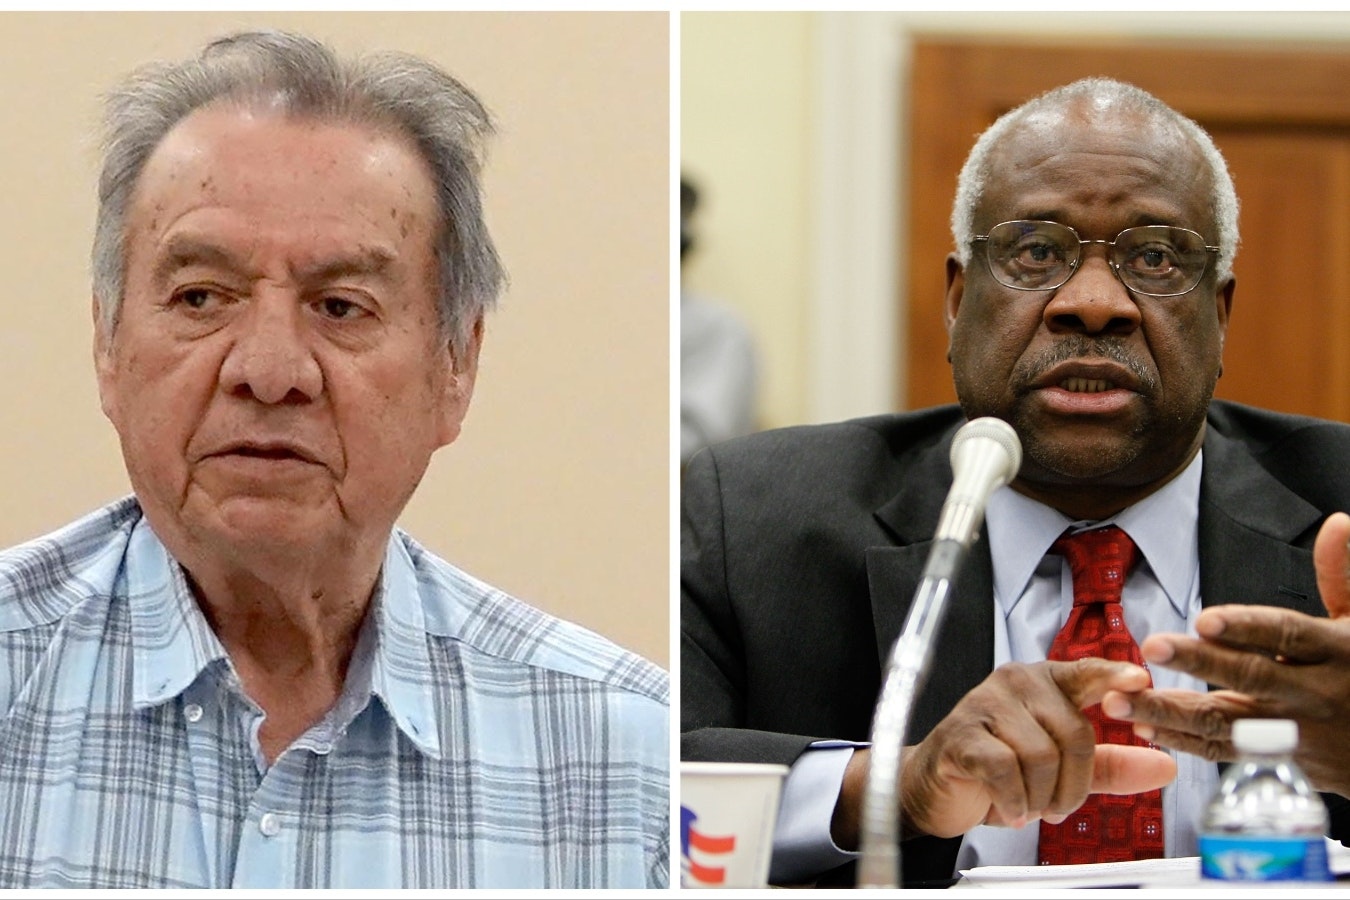 John St. Clair, left, chairman of the Eastern Shoshone Business Council, calls Thursday's U.S. Supreme Court ruling upholding ICWA a victory. Justice Clarence Thomas, right, was one of two dissenters to vote against upholding the Indian Child Welfare Act.